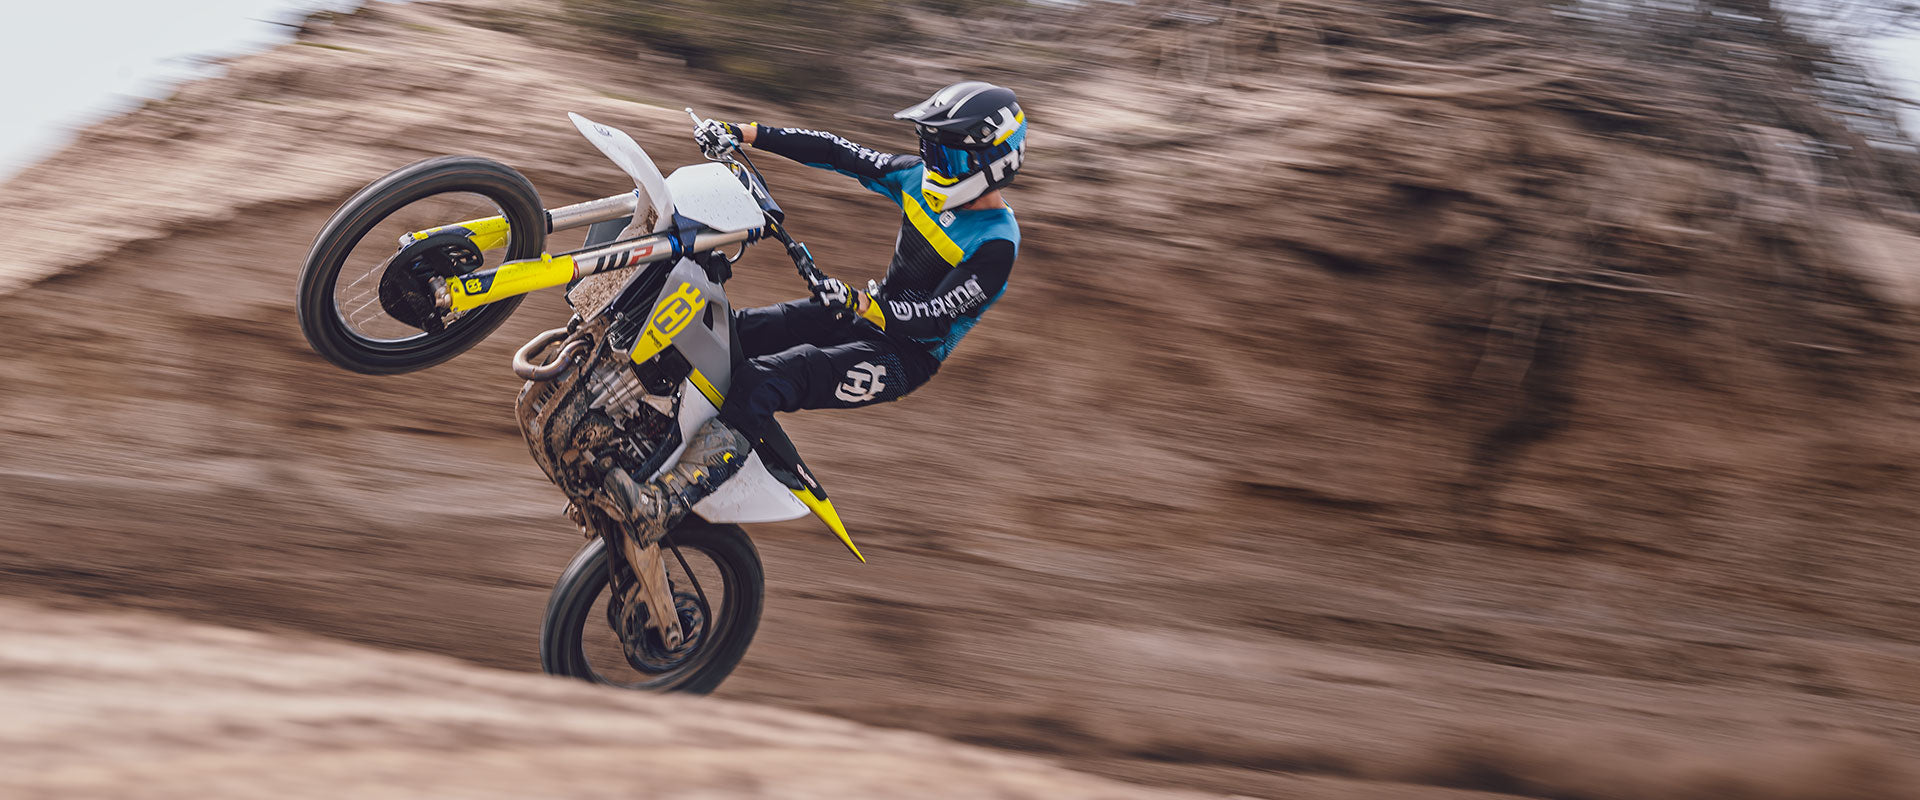 What Precisely Is The New Husqvarna 450 X